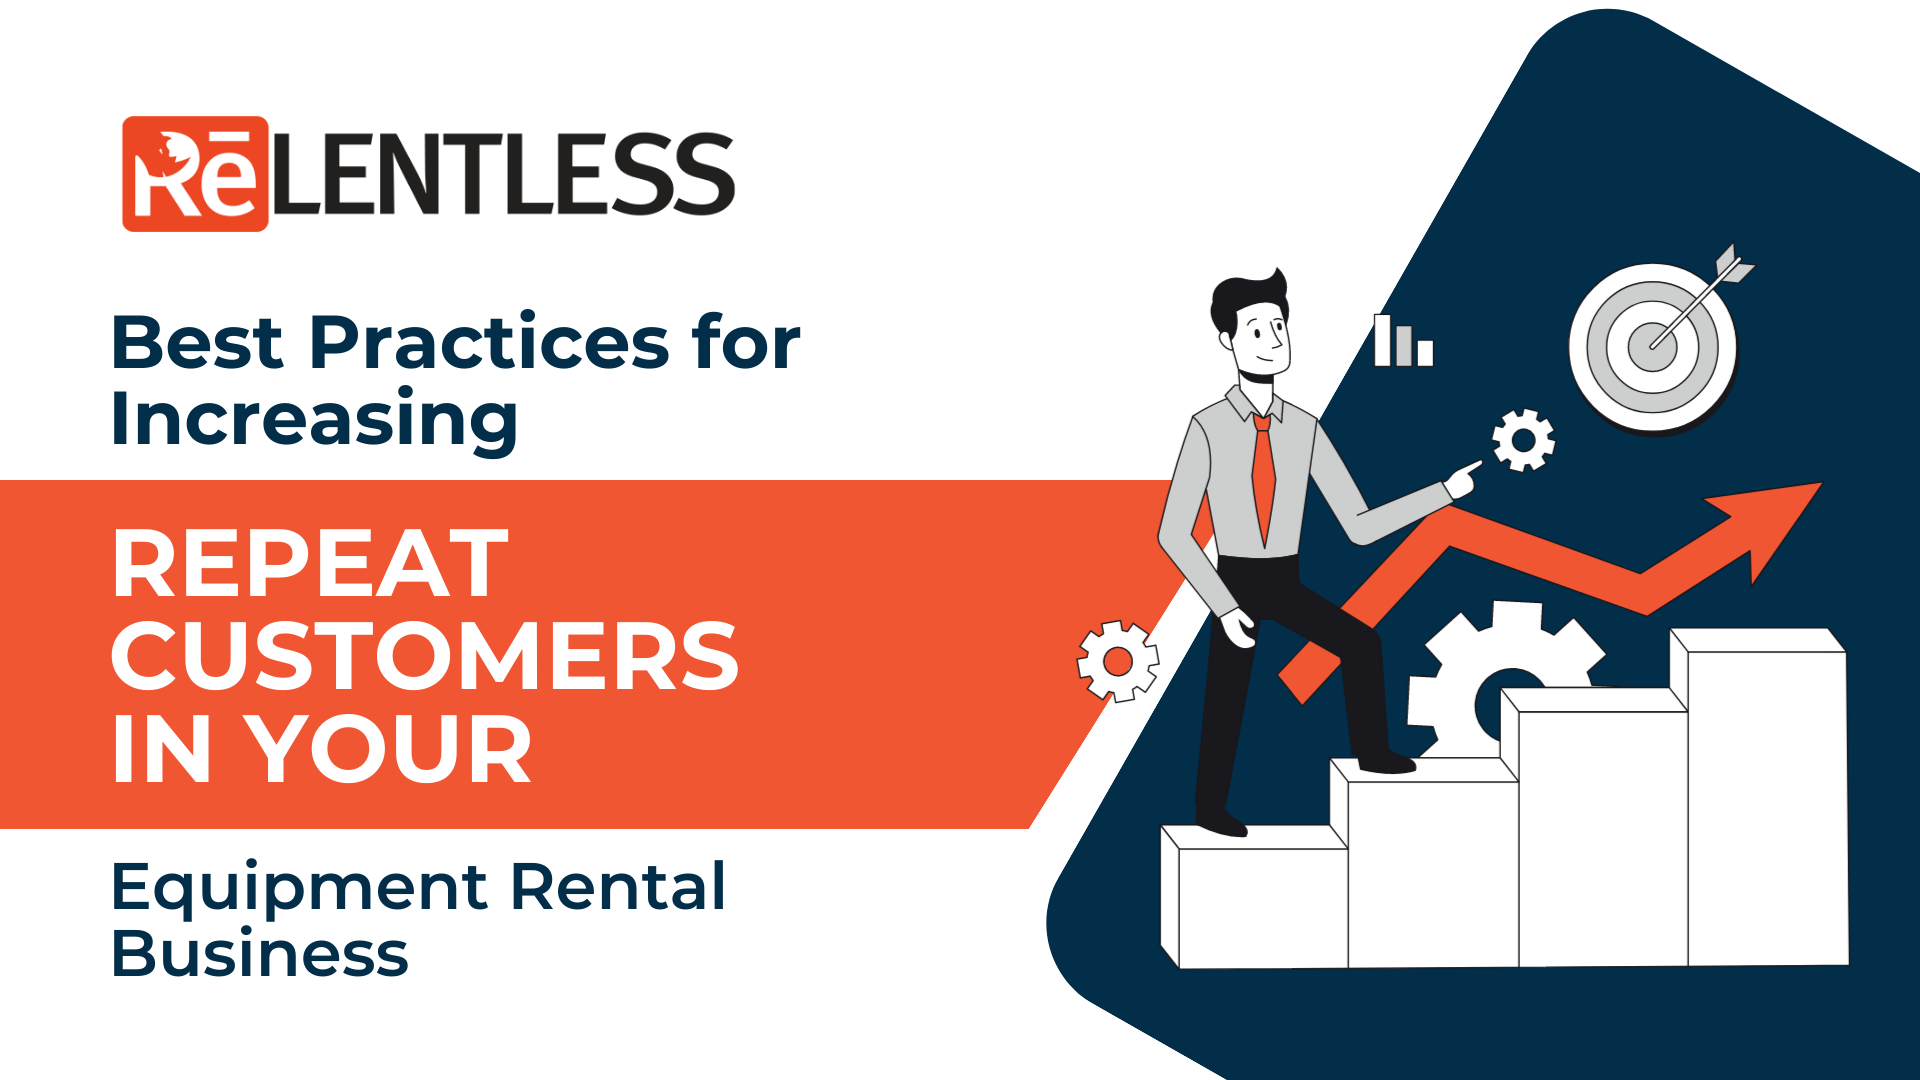 Best Practices for Increasing Repeat Customers in Your Equipment Rental Business